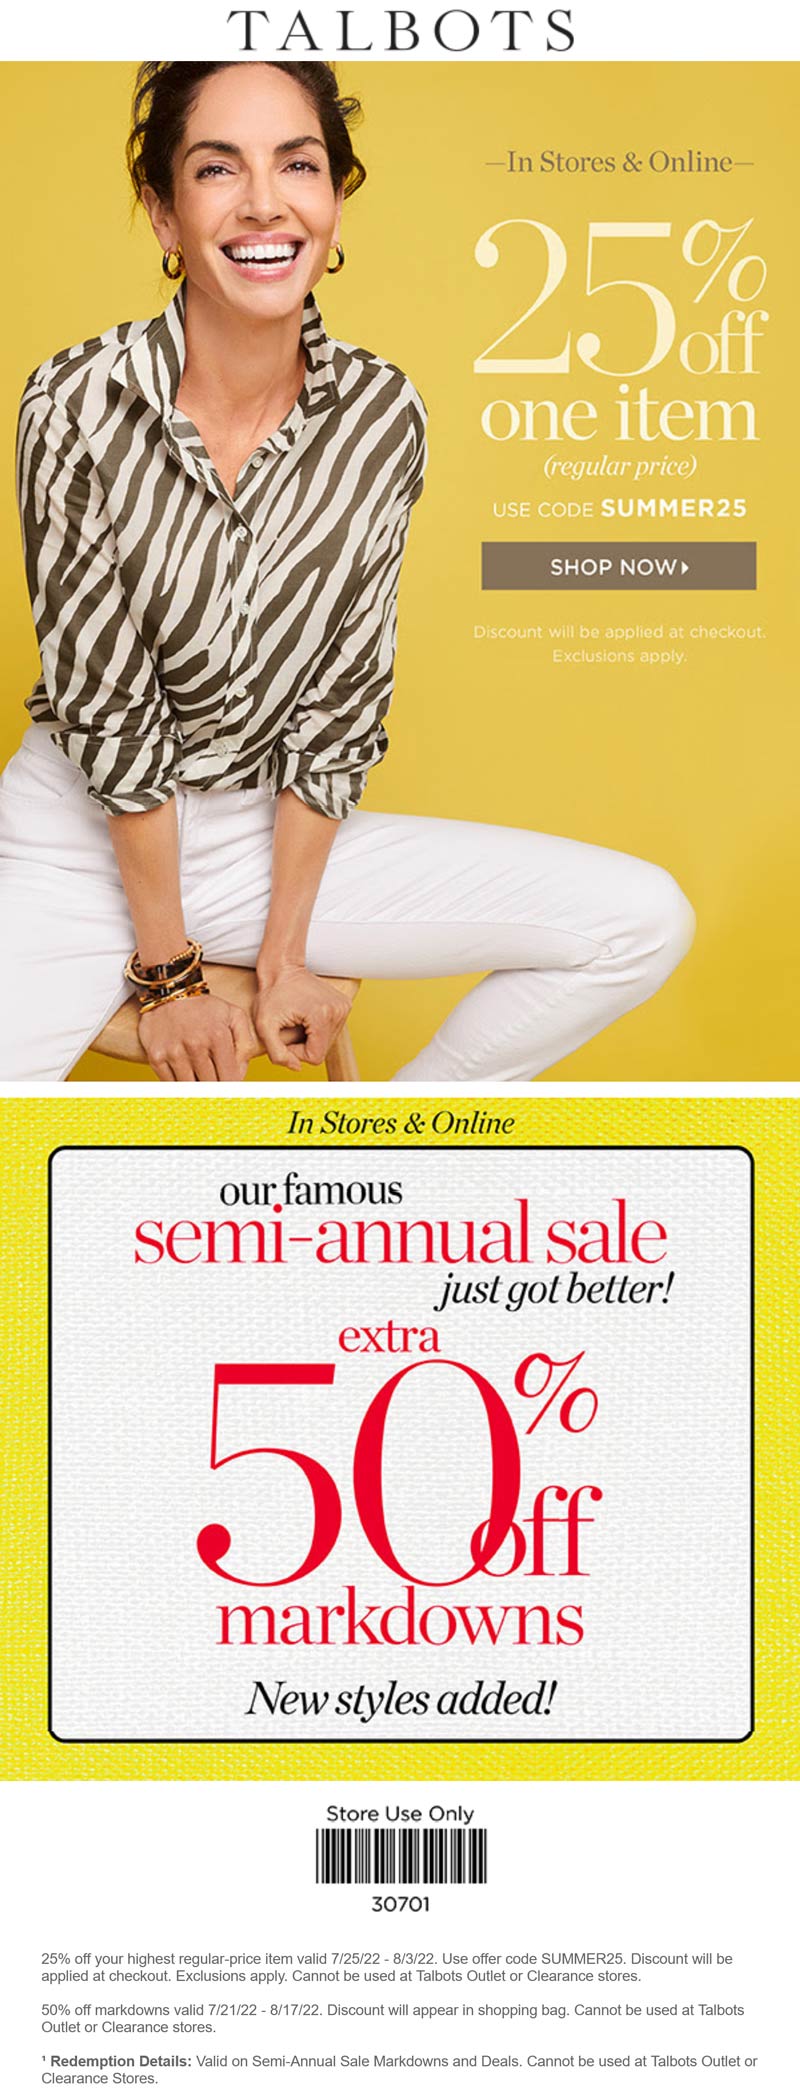 Talbots stores Coupon  25% off a single item & more at Talbots, or online via promo code SUMMER25 #talbots 